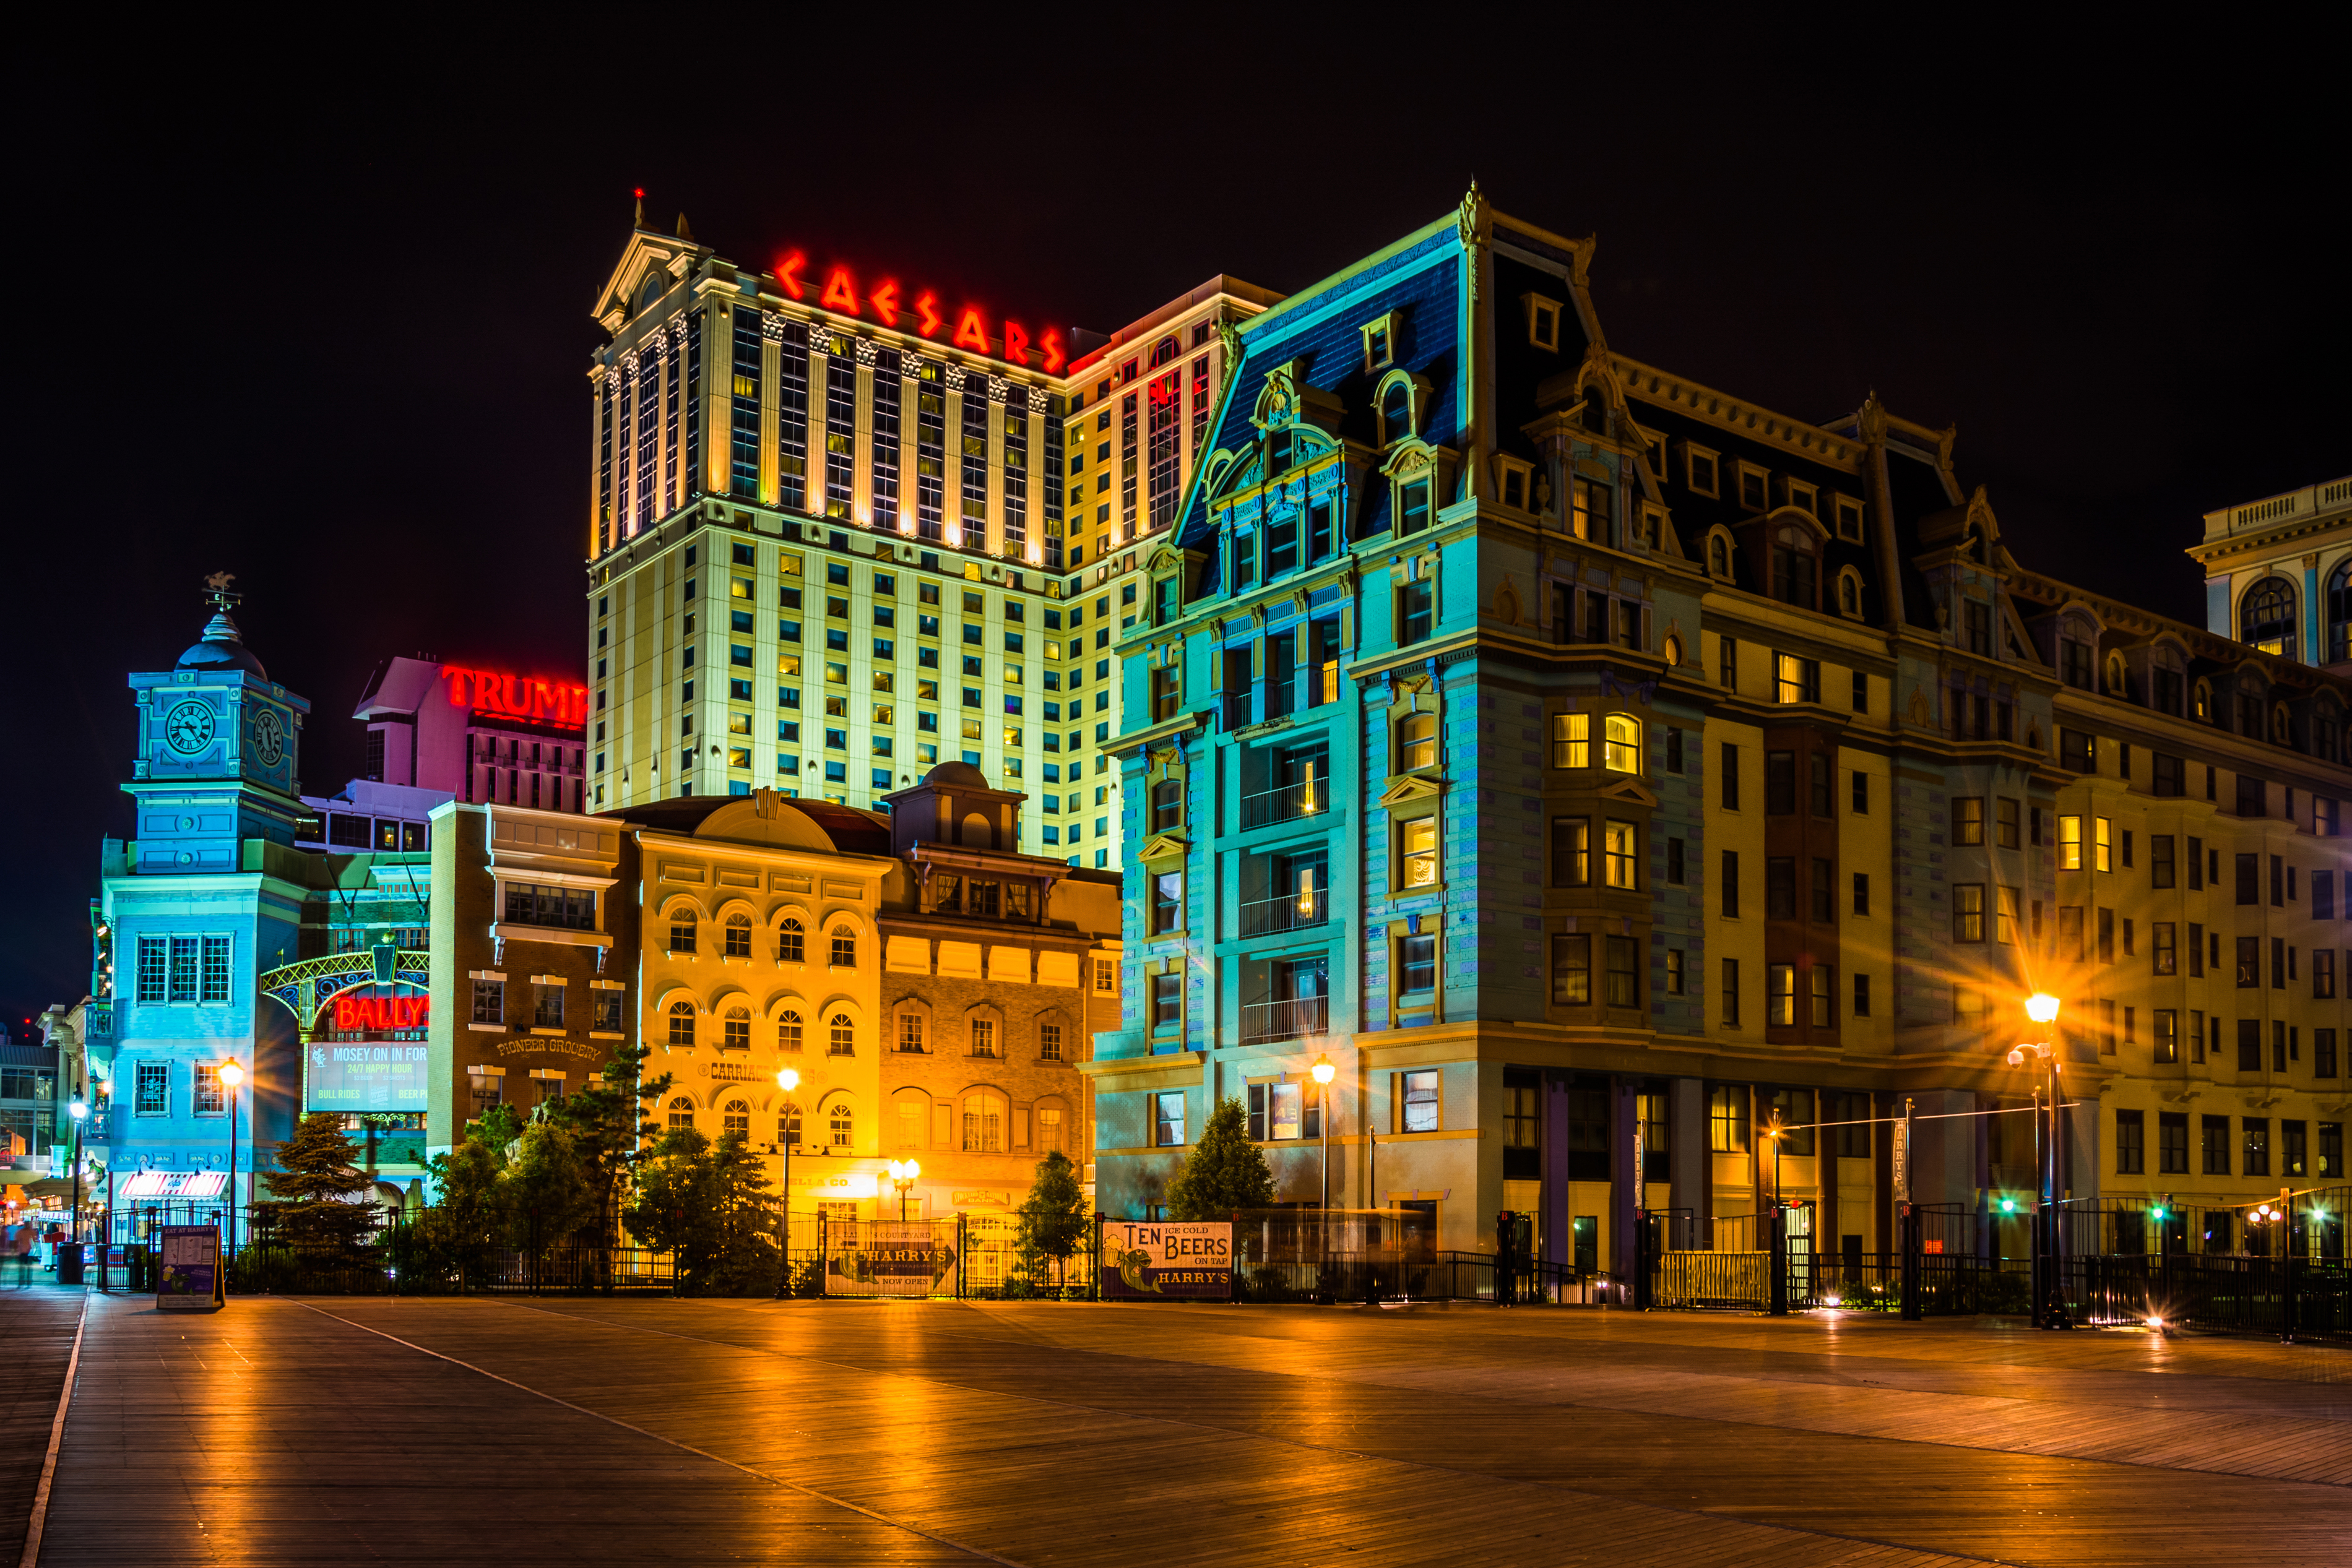 Nighttime view of the Caesar&#x27;s and Trump Plaza buildings with illuminated signage